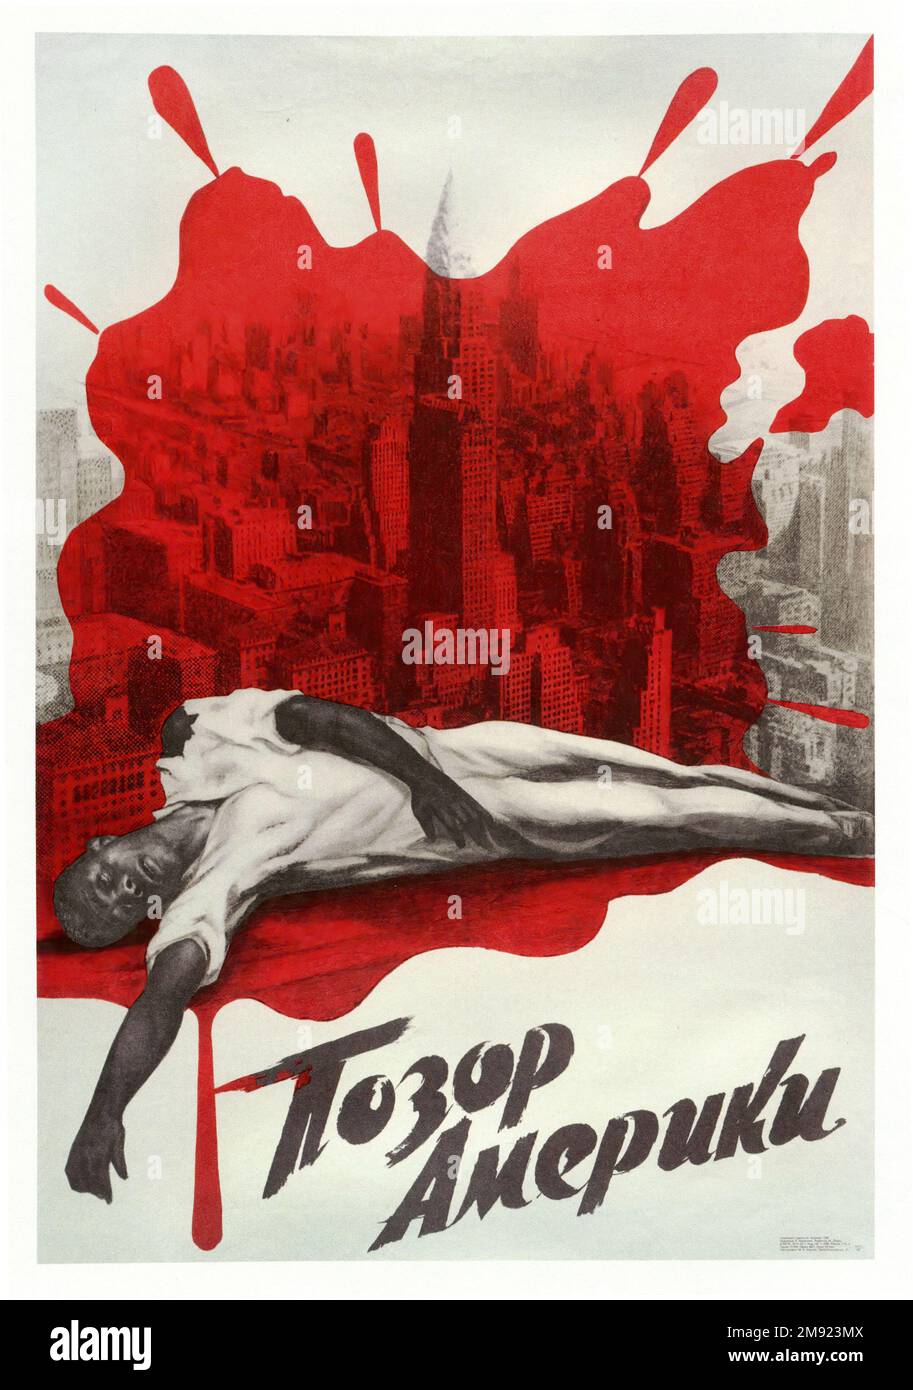 Americas Shame 1968   -  (Translated from Russian) - Vintage USSR soviet propaganda poster Stock Photo